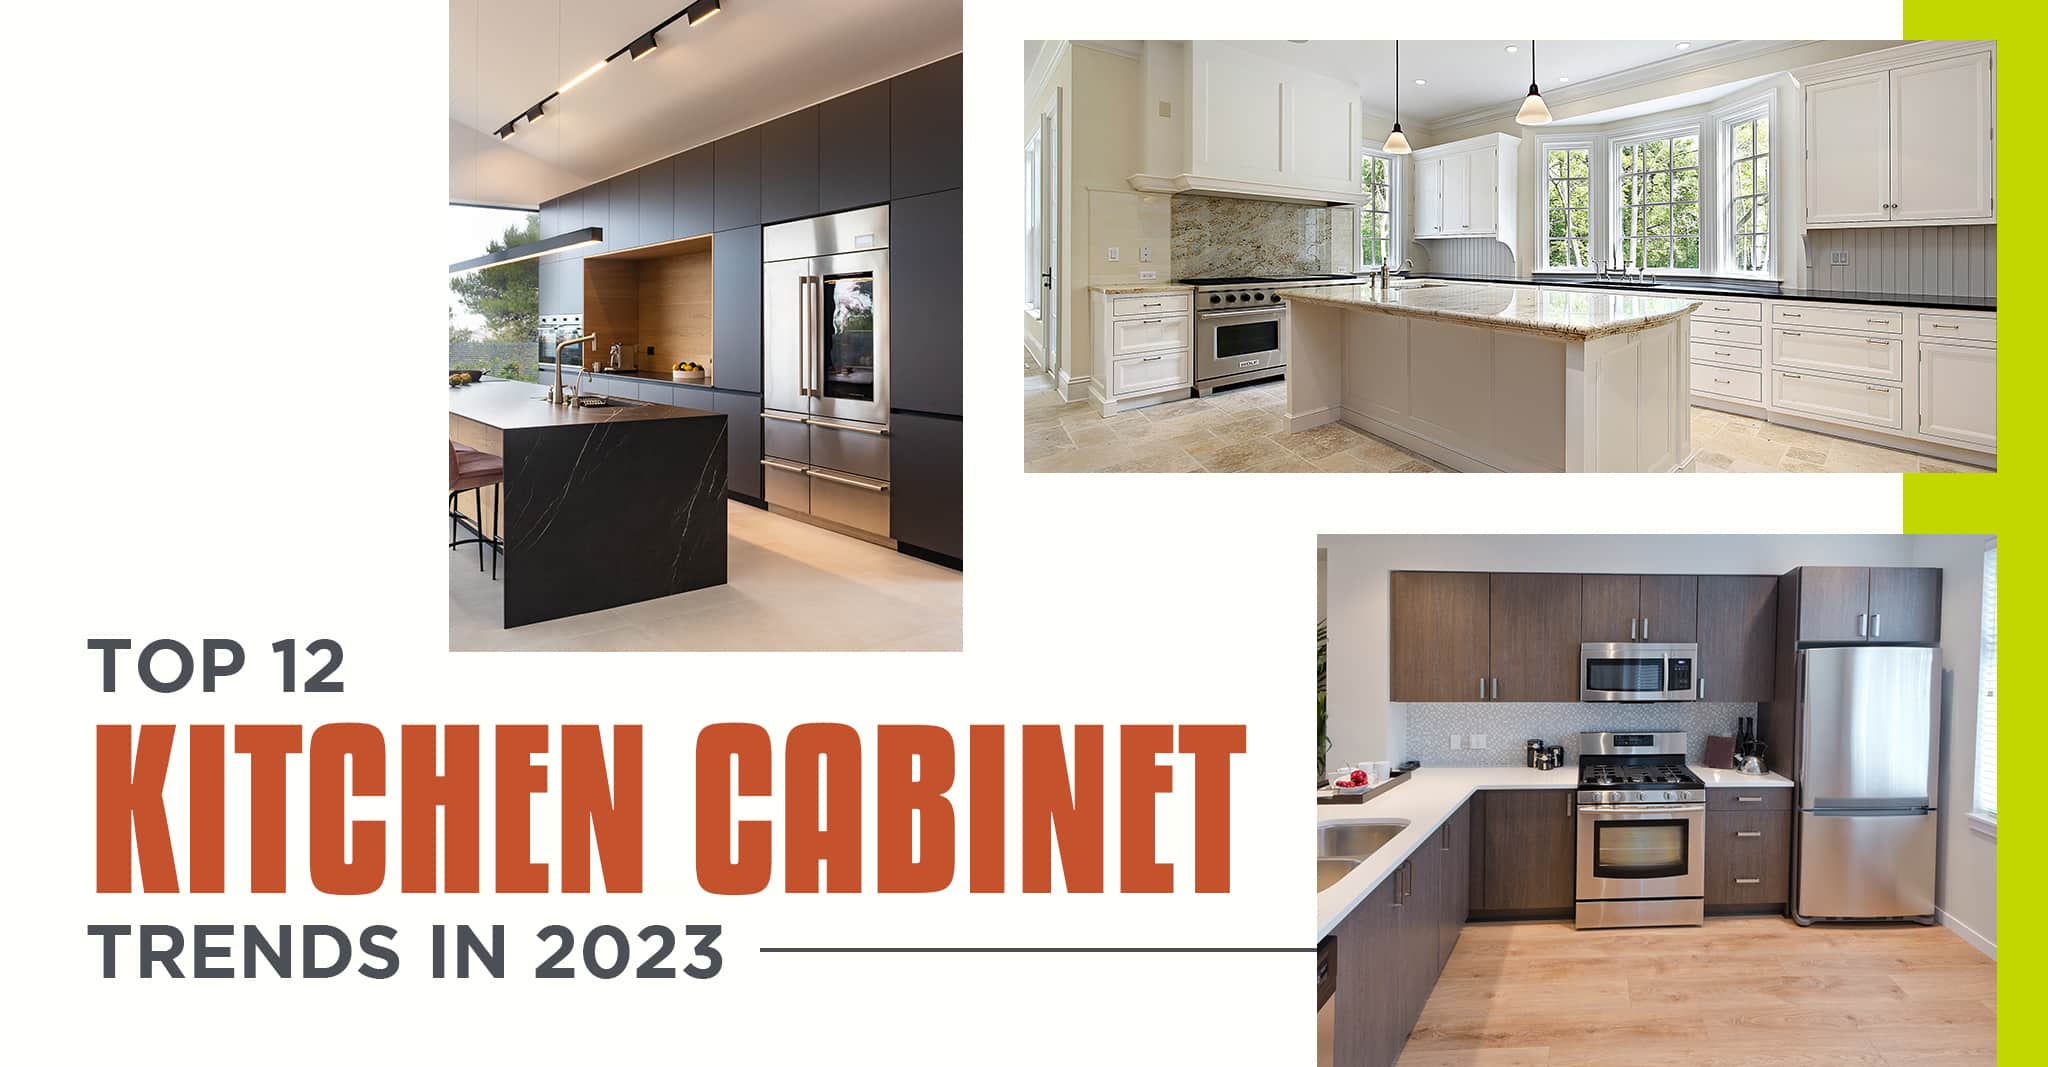 Current Trends in the Kitchen Cabinet Business - Great Buy Cabinets